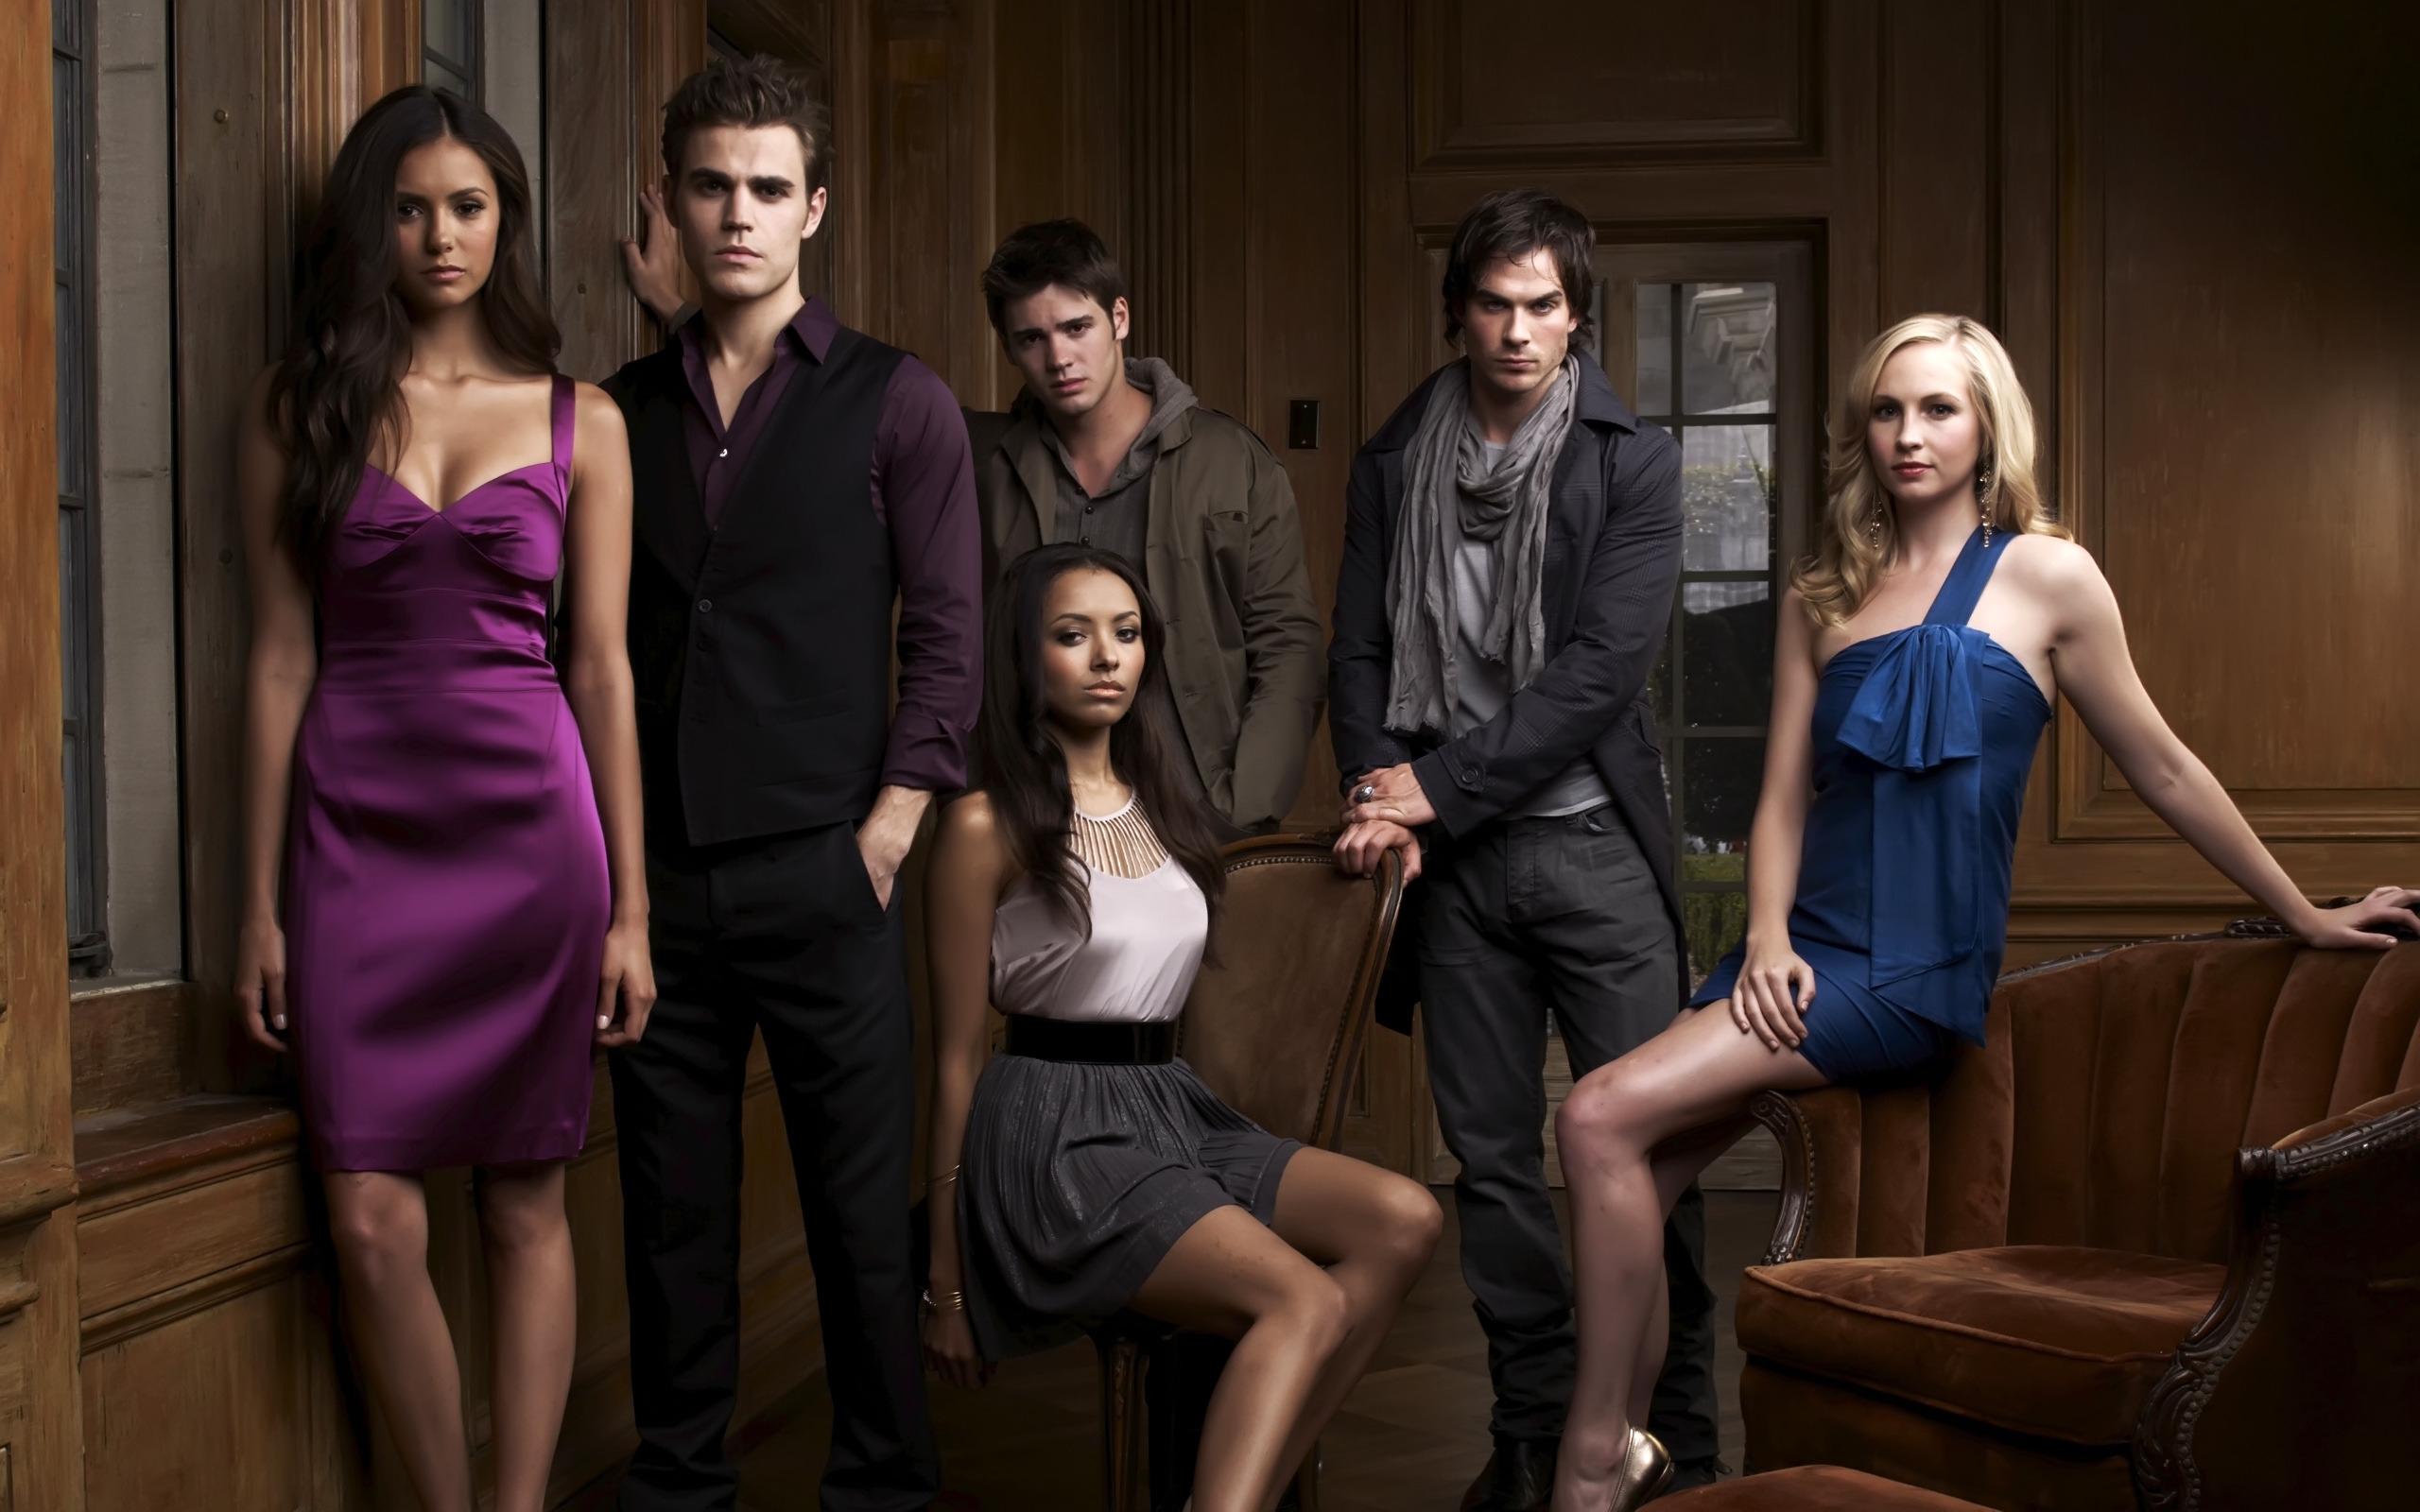 The Vampire Diaries Cast for 2560 x 1600 widescreen resolution